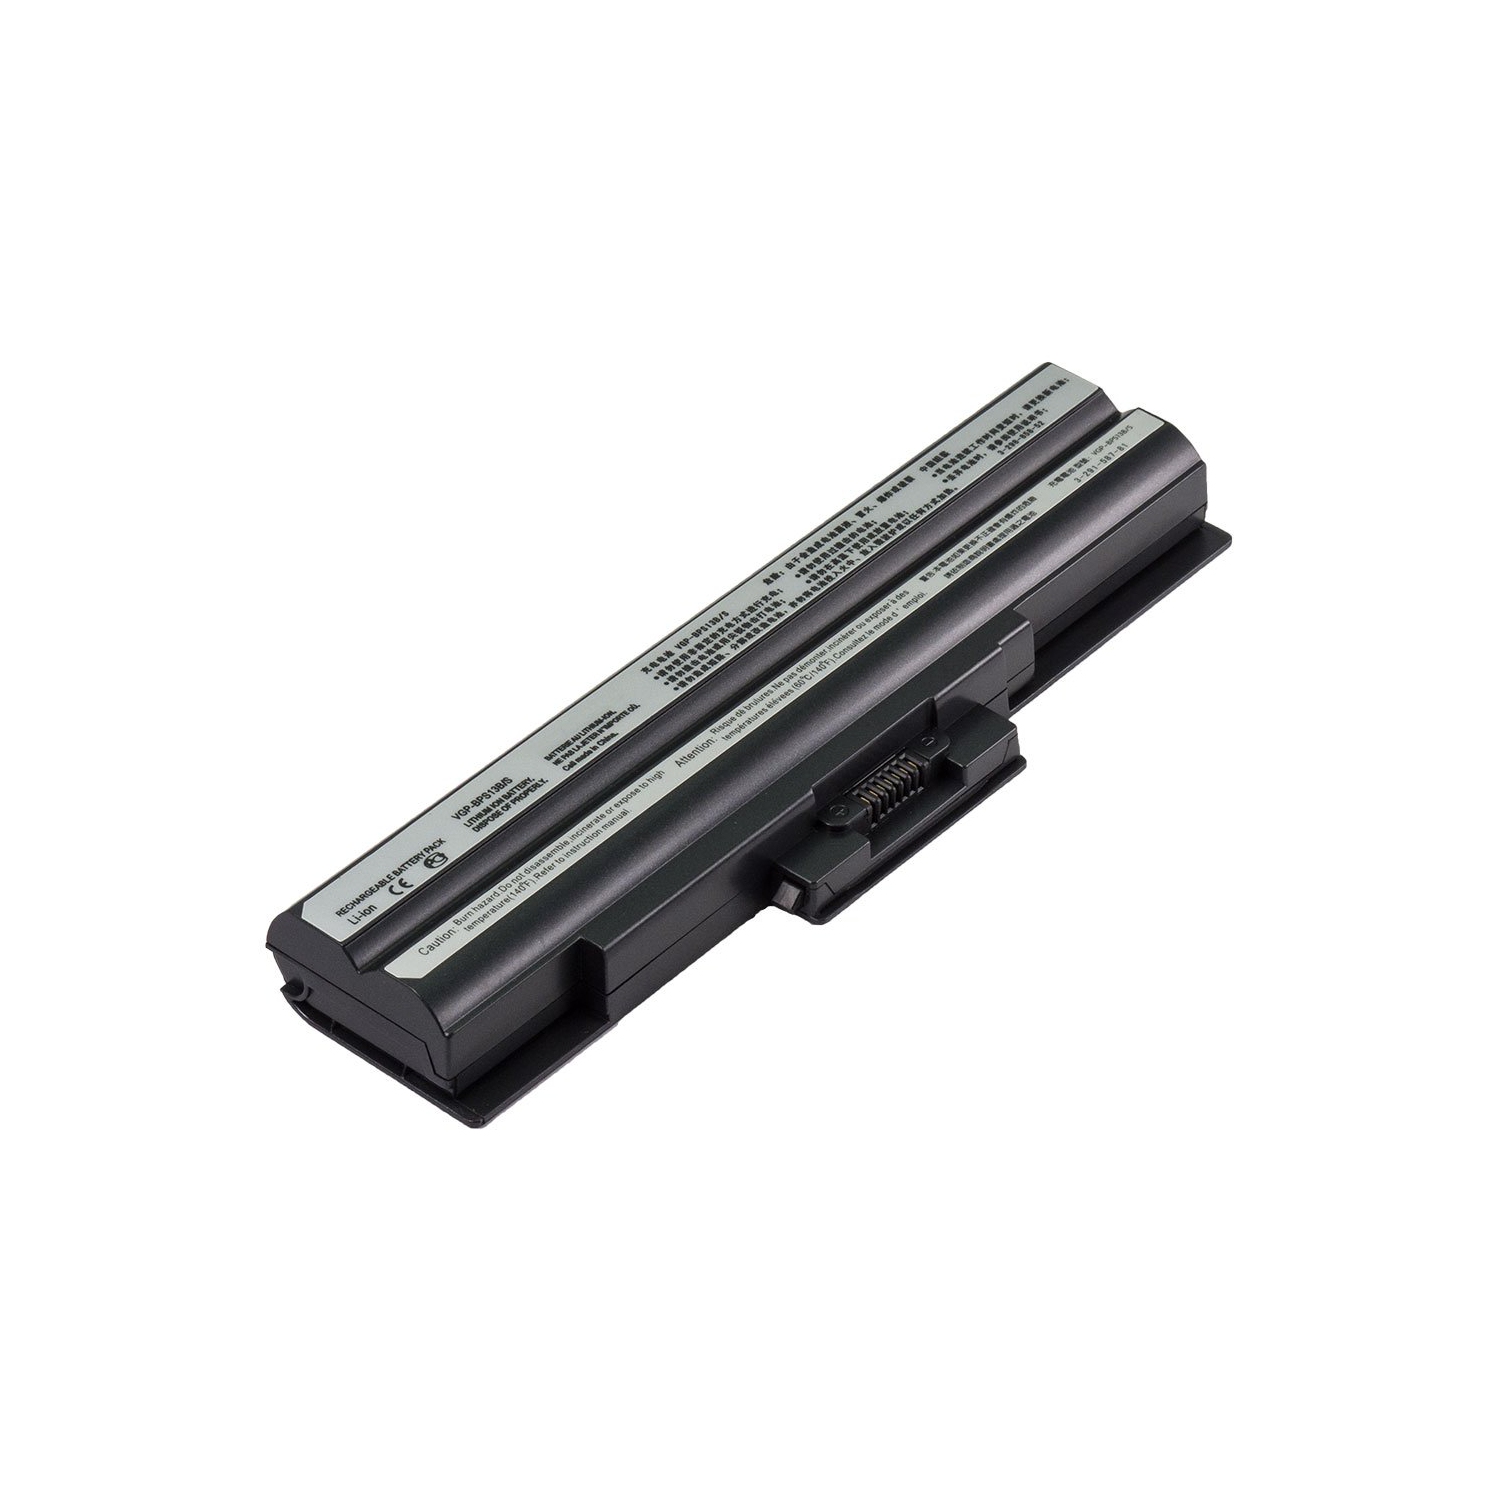 Laptop Battery Replacement for Sony VAIO VGN-FW292 Series, VGP-BPL13, VGP-BPS13/Q, VGP-BPS13A/B, VGP-BPS13A/S, VGP-BPS13A